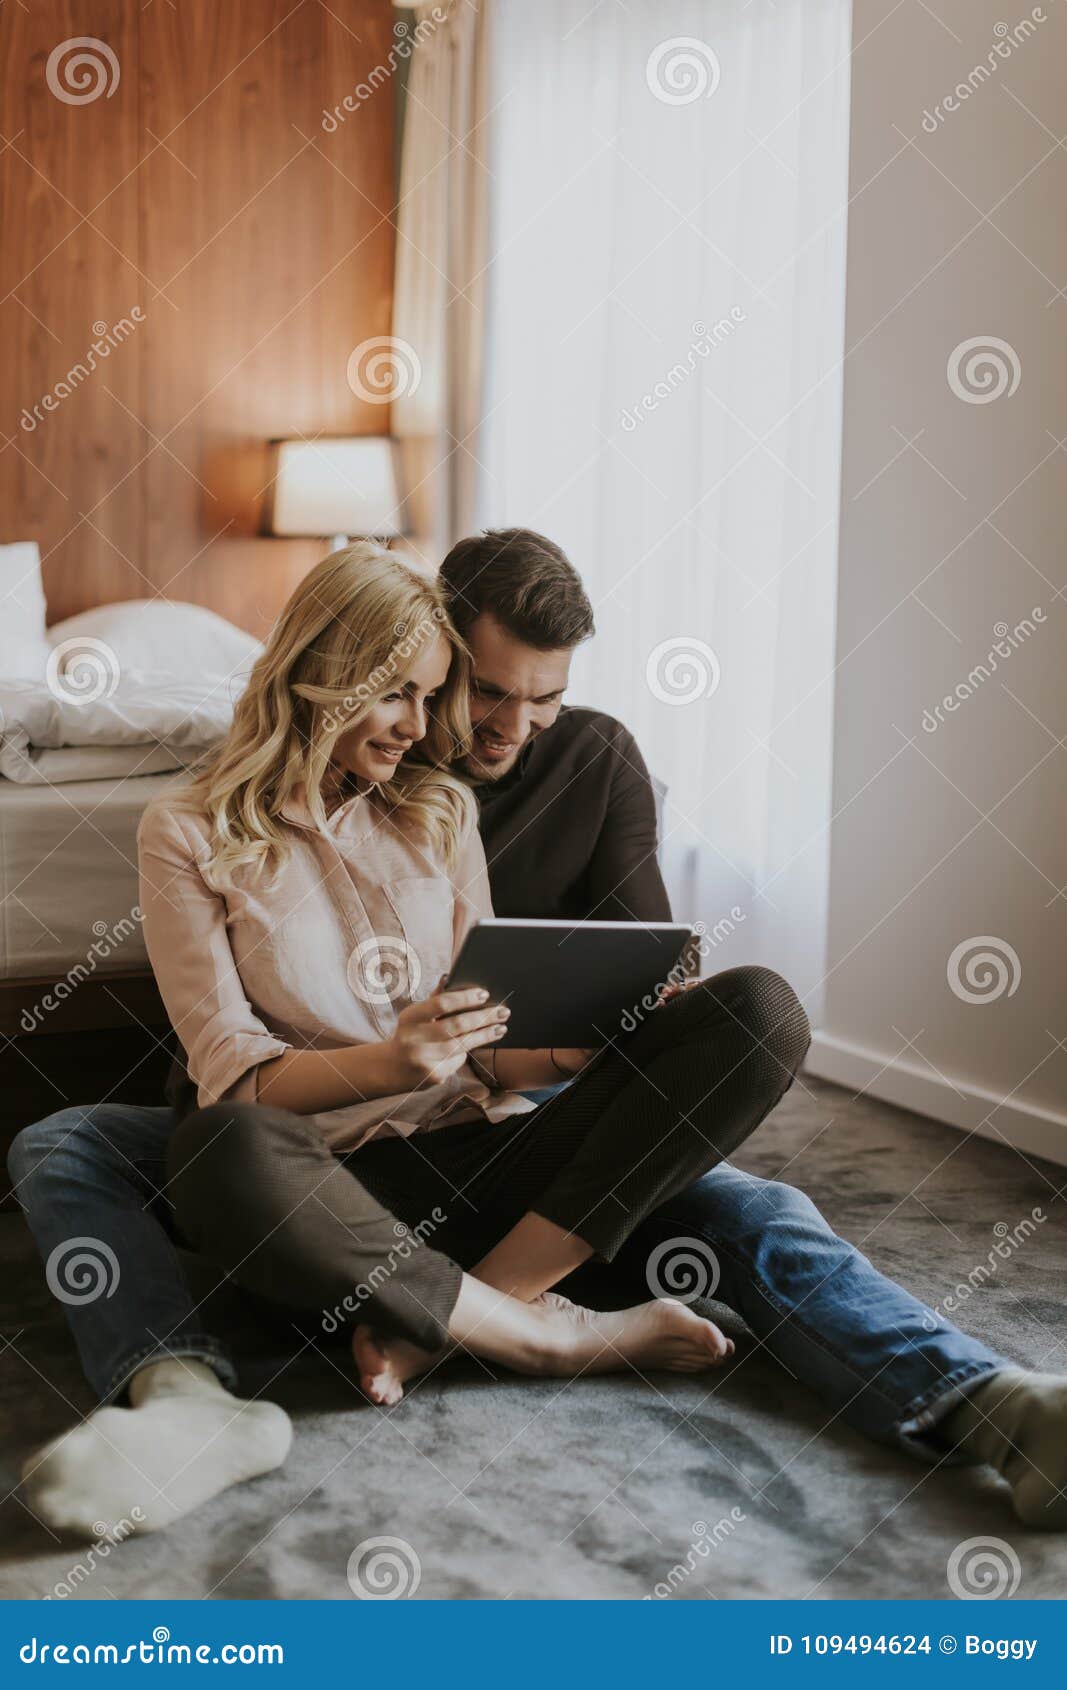 Loving Couple Sitting On The Floor In Bedroom And Usin